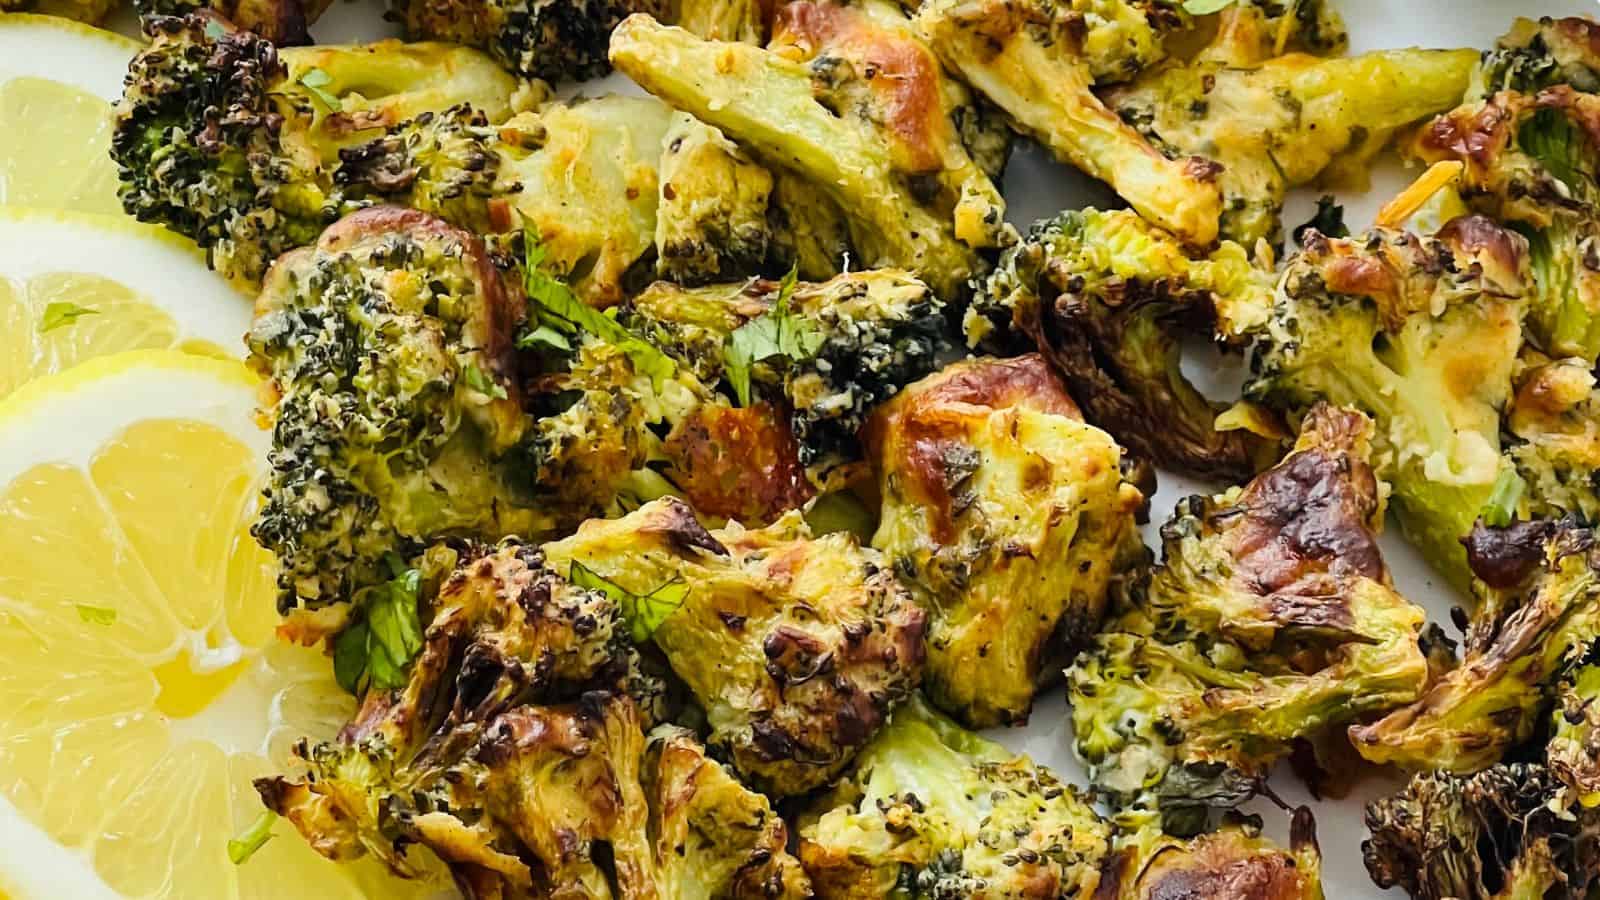 Close-up of roasted broccoli florets seasoned and slightly charred, accompanied by slices of lemon on the side.